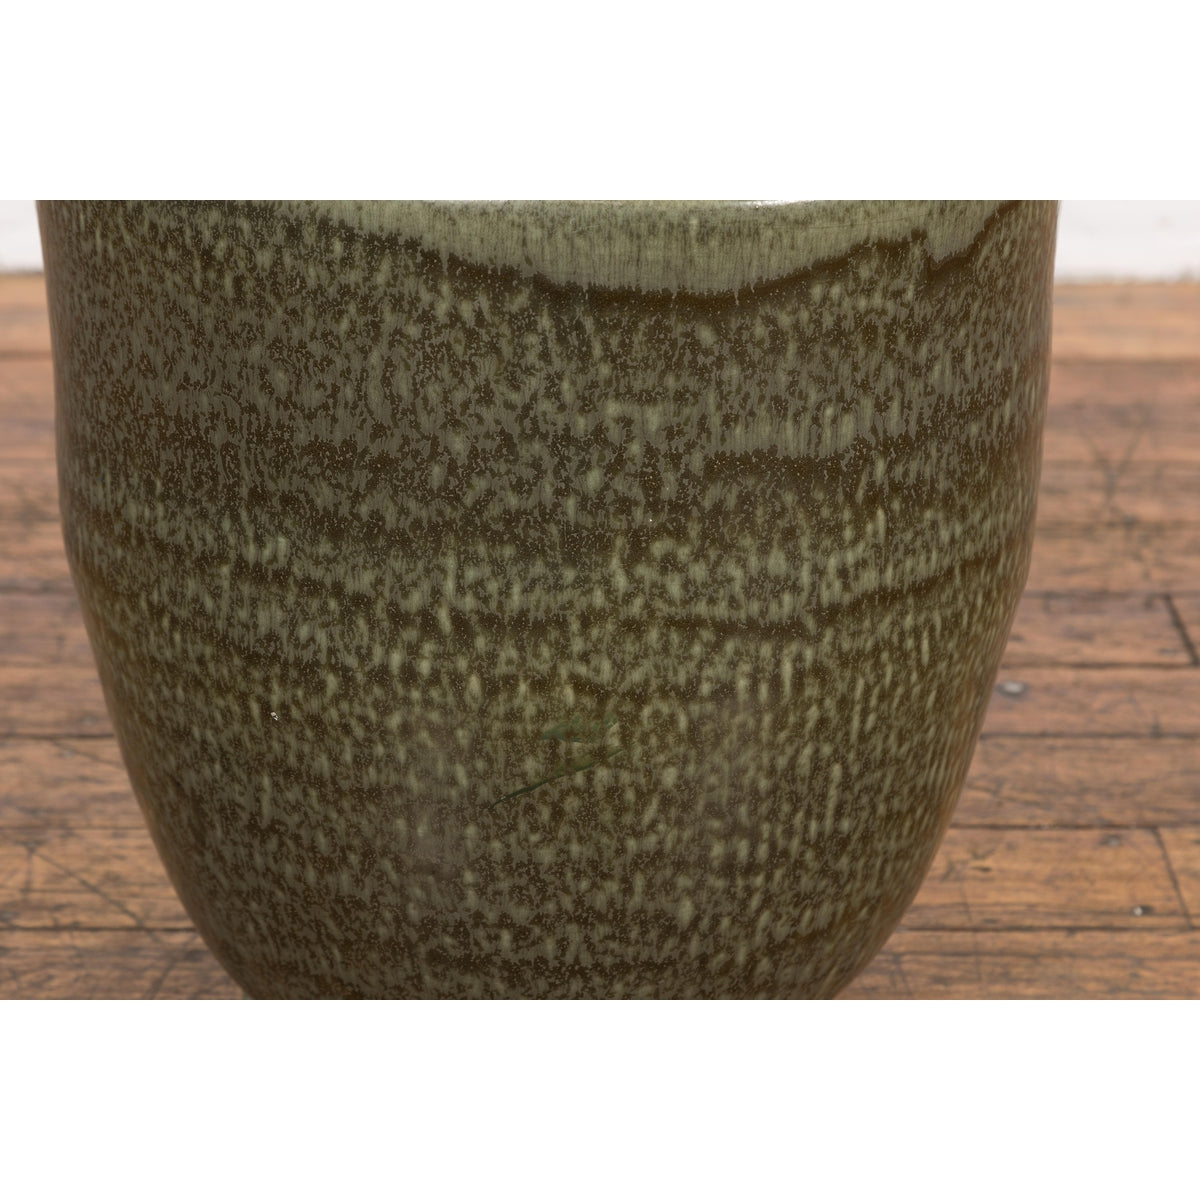 Large Green Glazed Planter with Oval Shaped Opening-YNE836-6. Asian & Chinese Furniture, Art, Antiques, Vintage Home Décor for sale at FEA Home